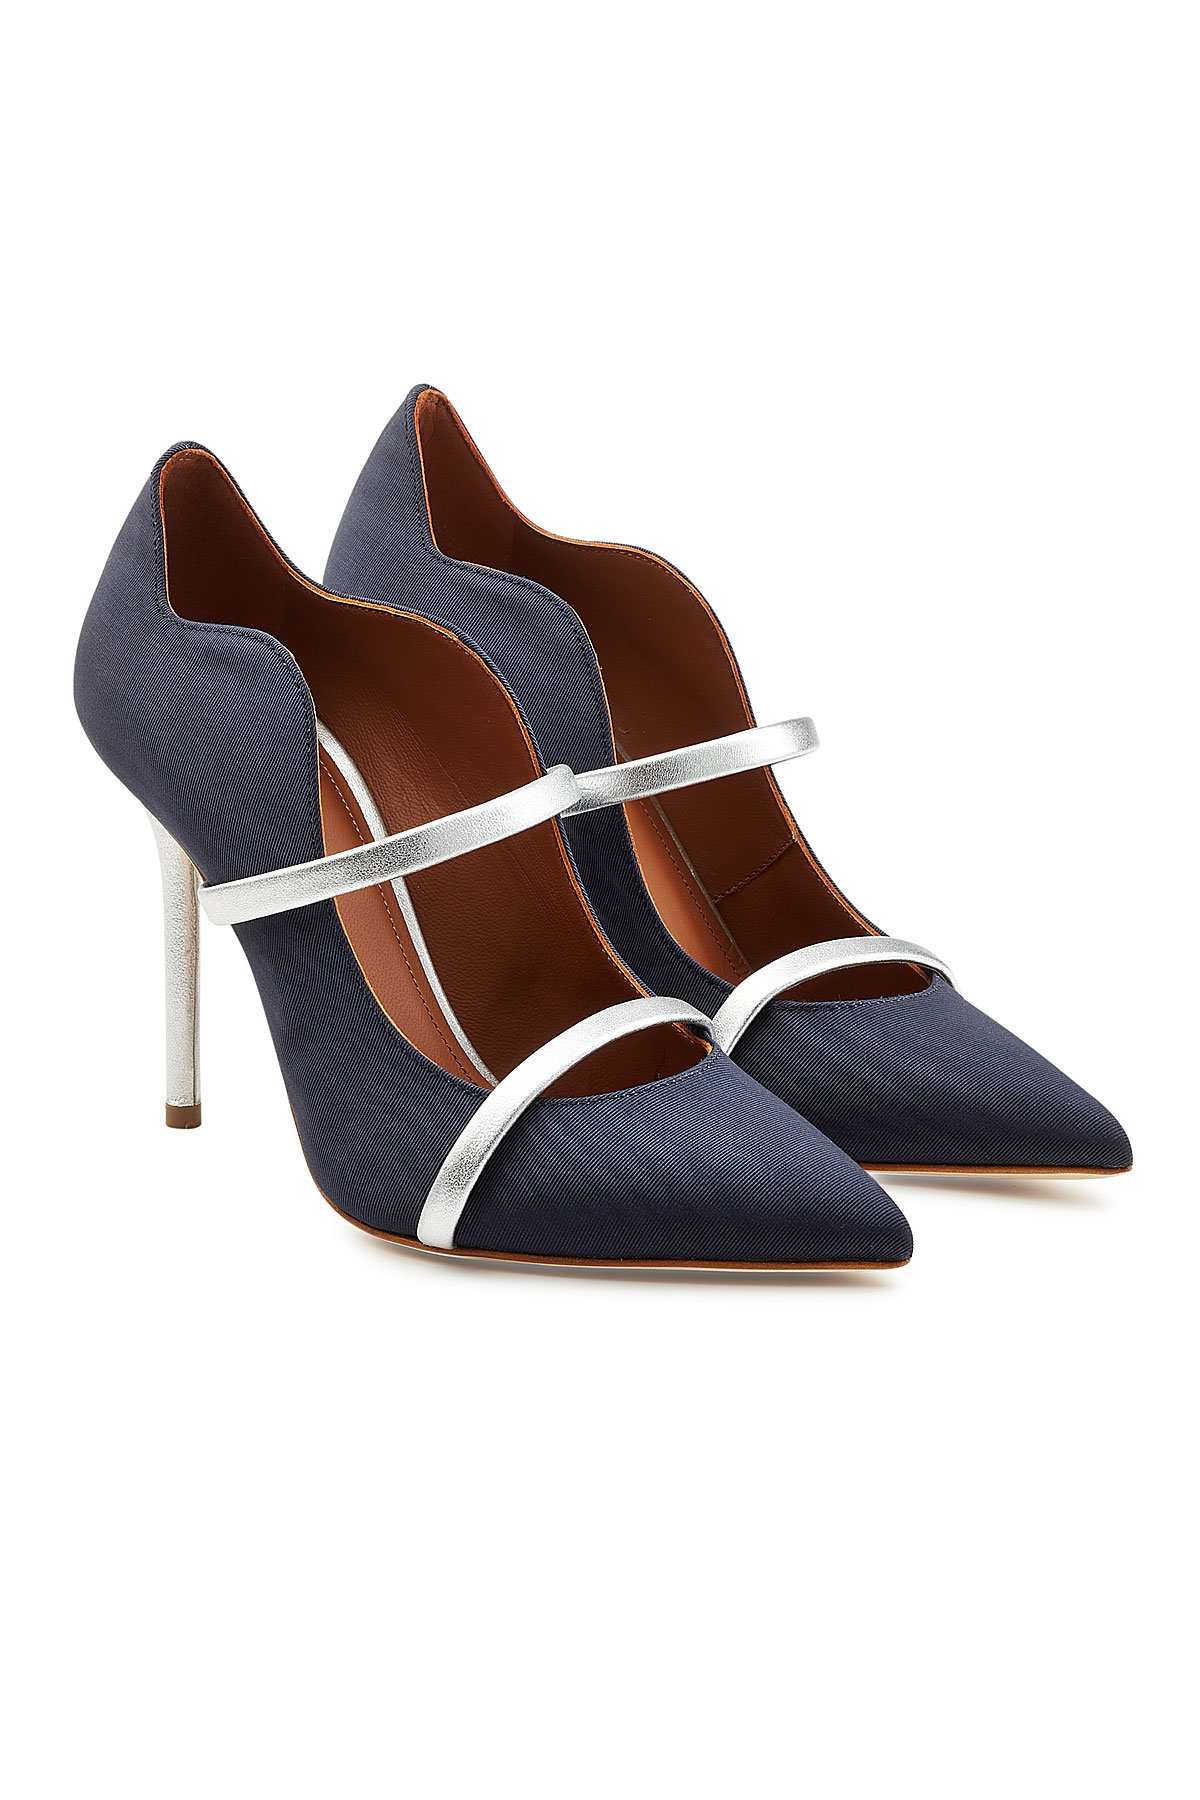 Malone Souliers - Maureen Mules with Leather